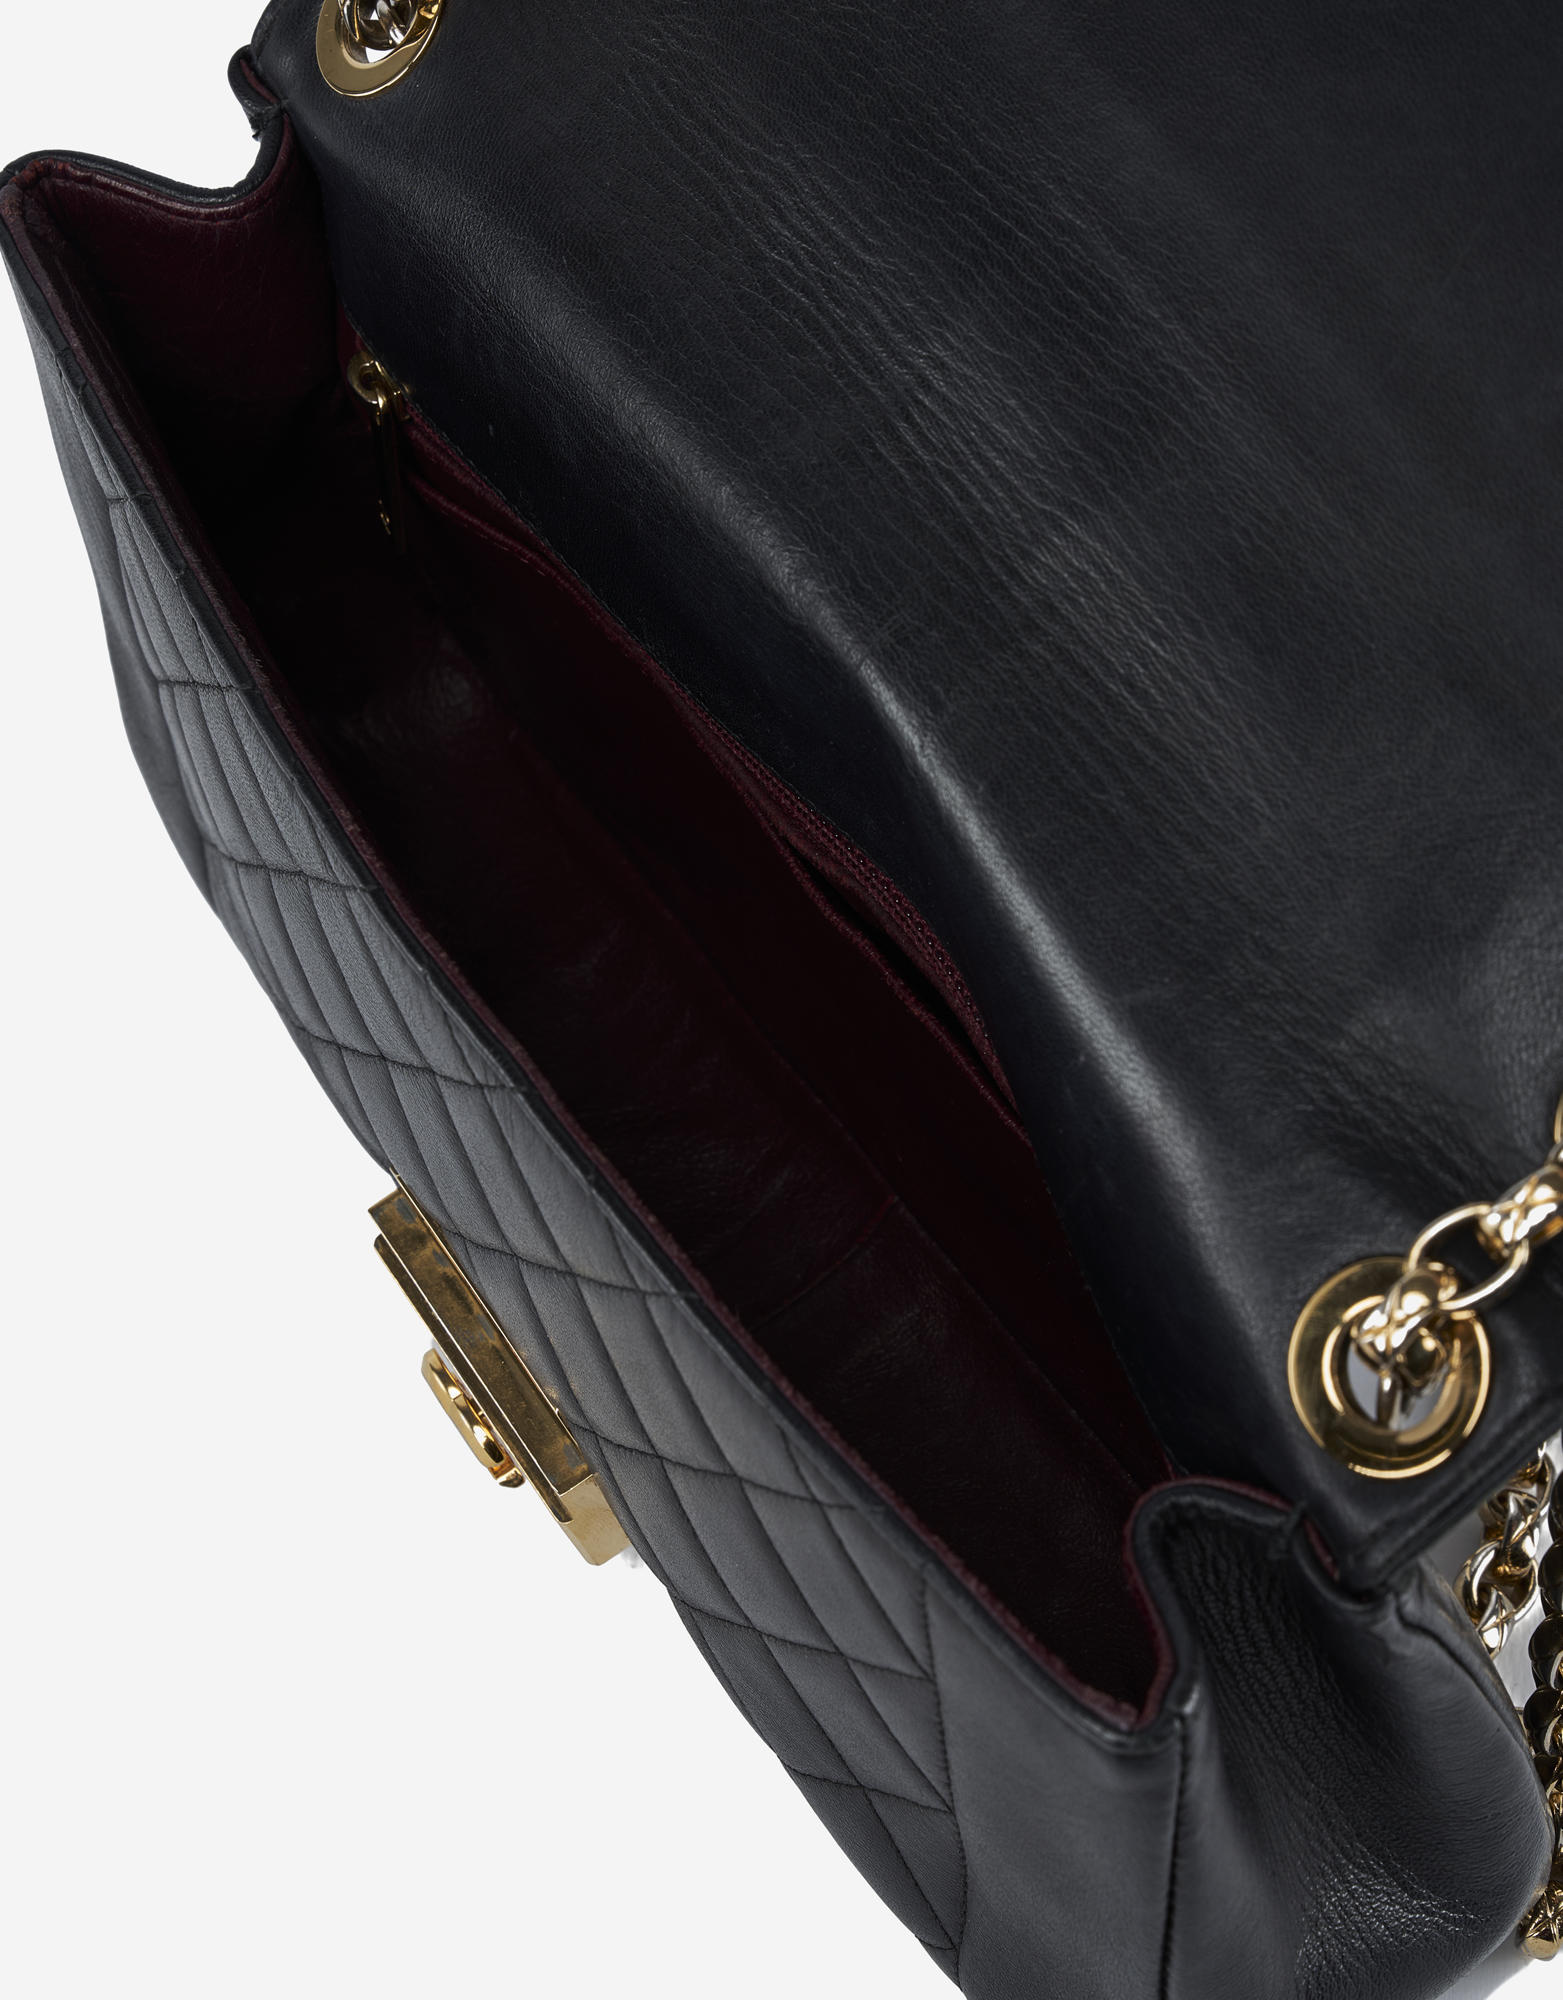 Chanel_Chic_With_Me_Large_Calf_Leather_Black